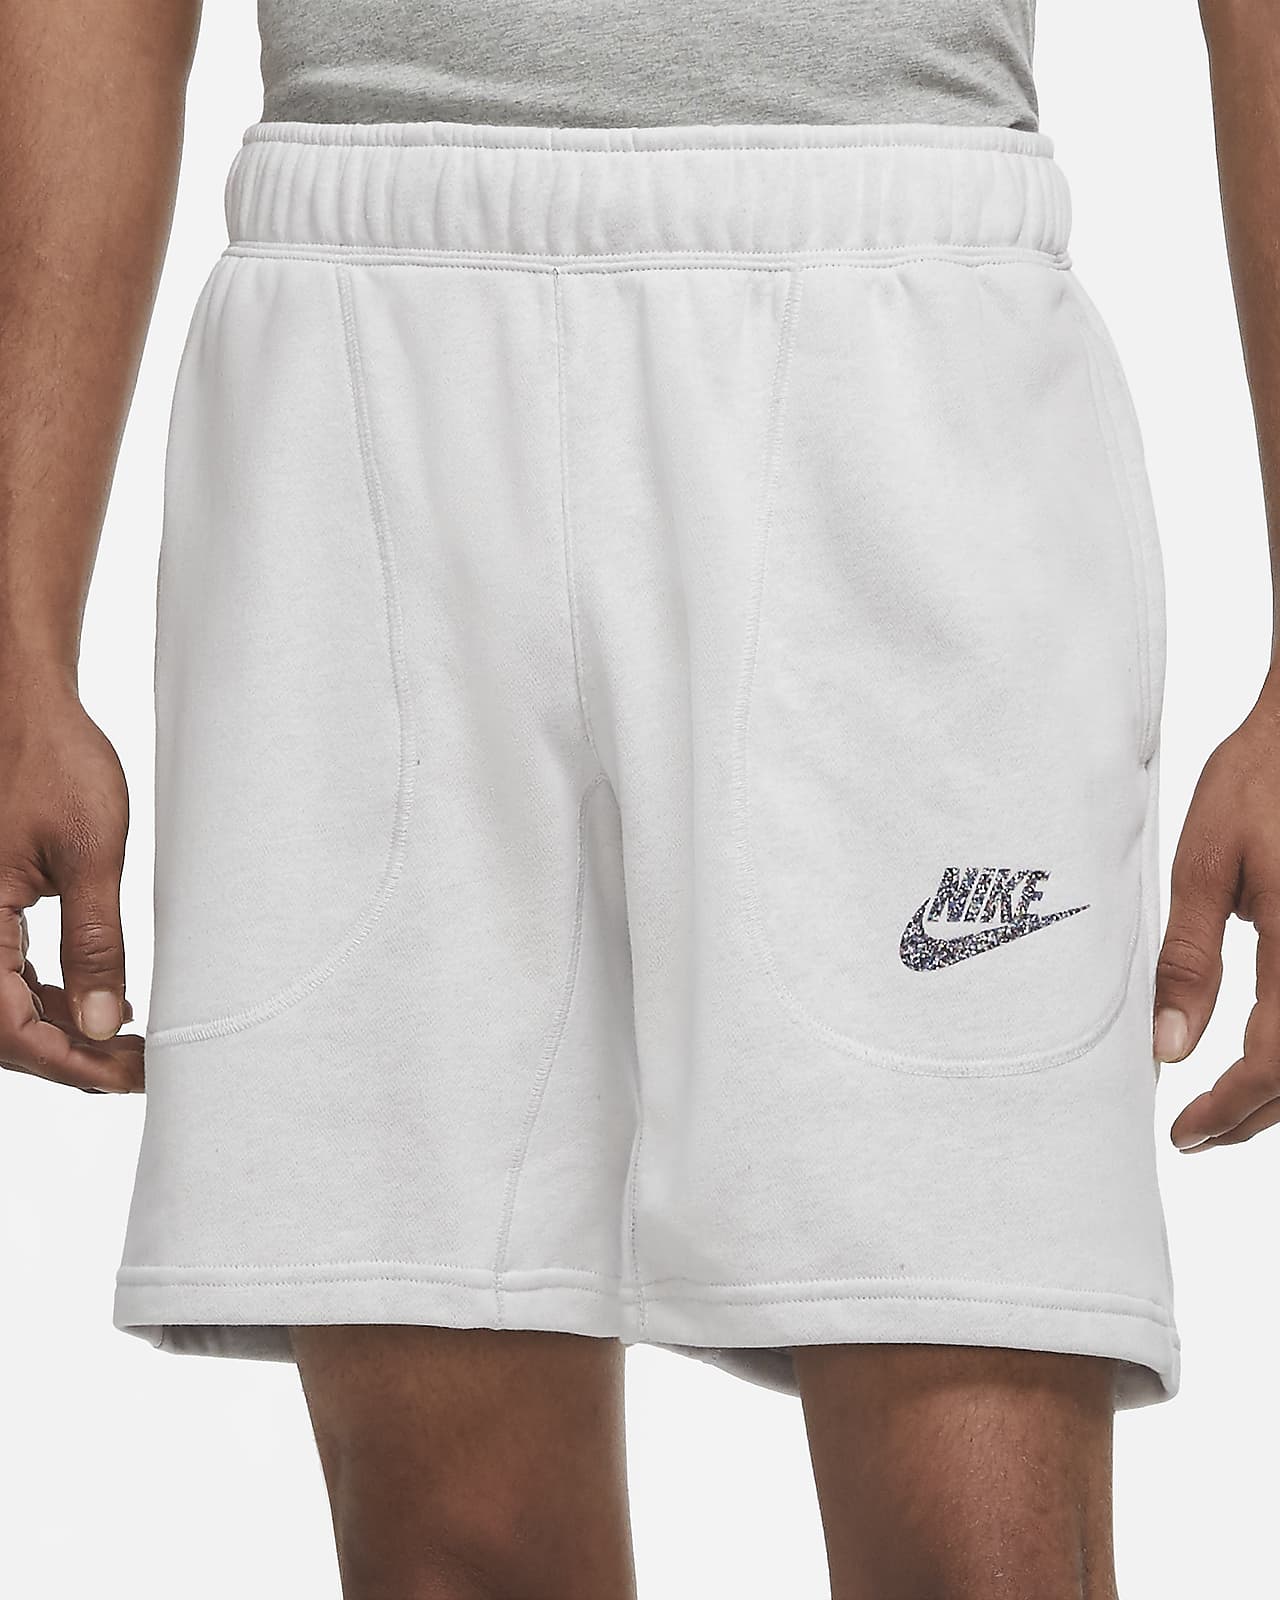 nike men's french terry shorts